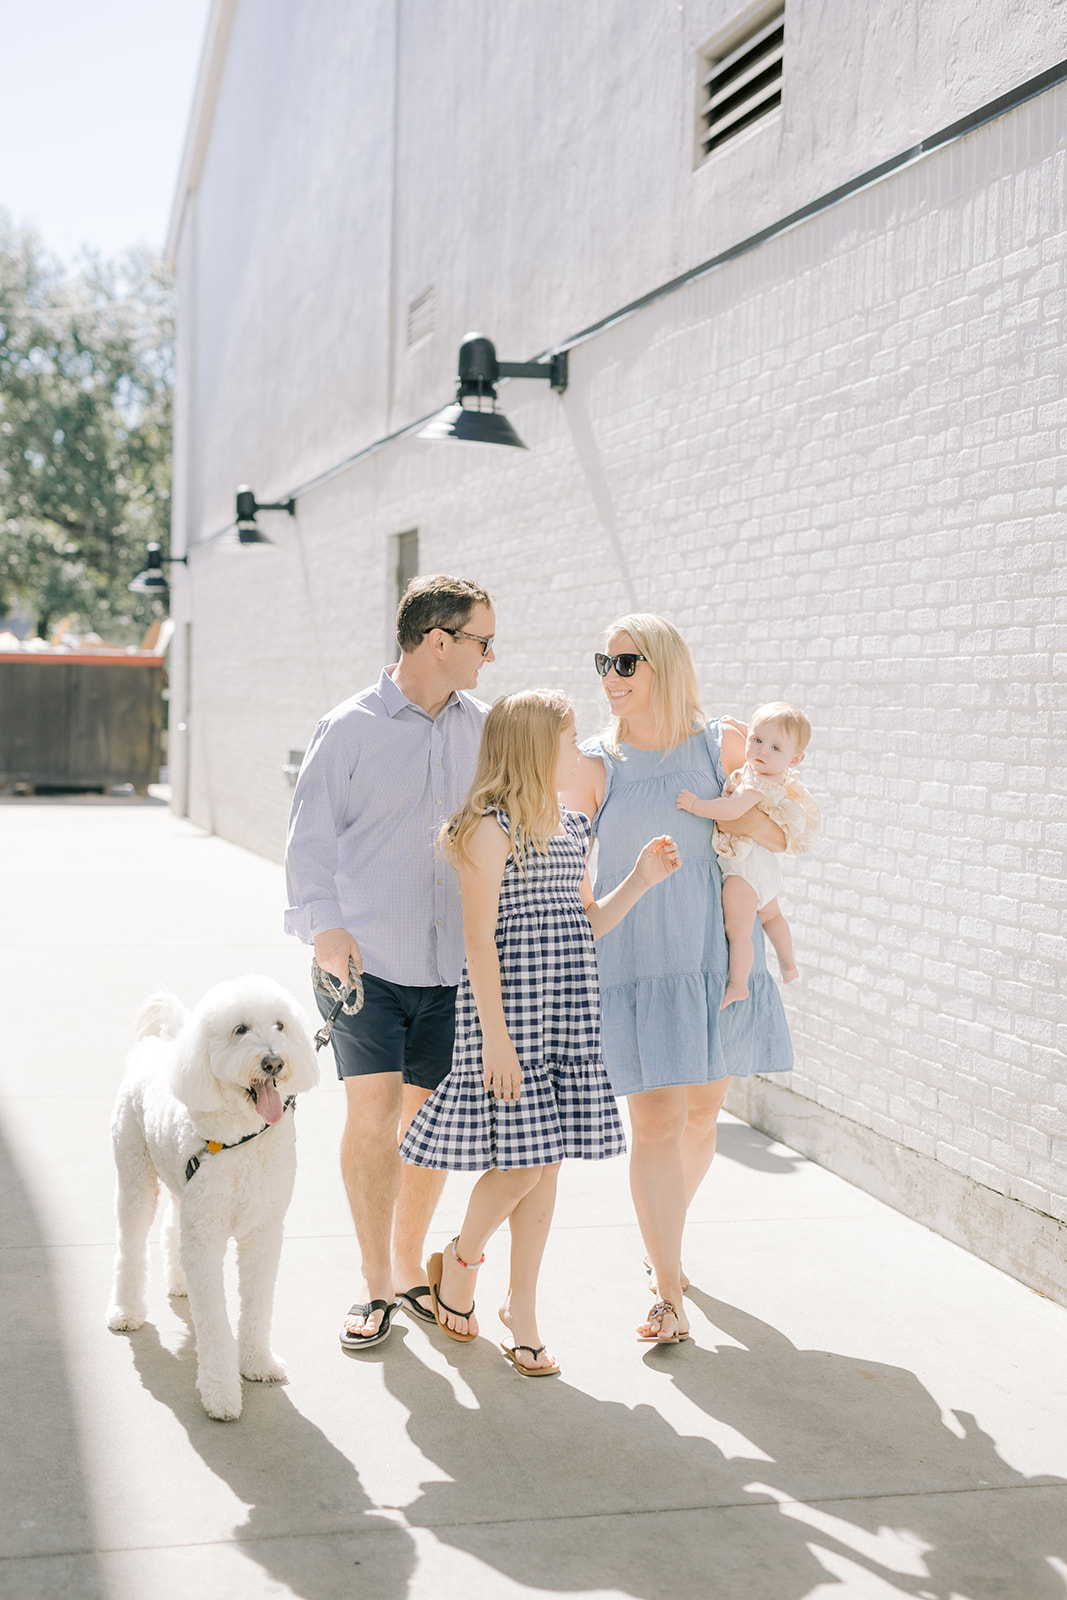 Experience the joy of family photography in Tampa’s scenic Hyde Park with Hernan.
